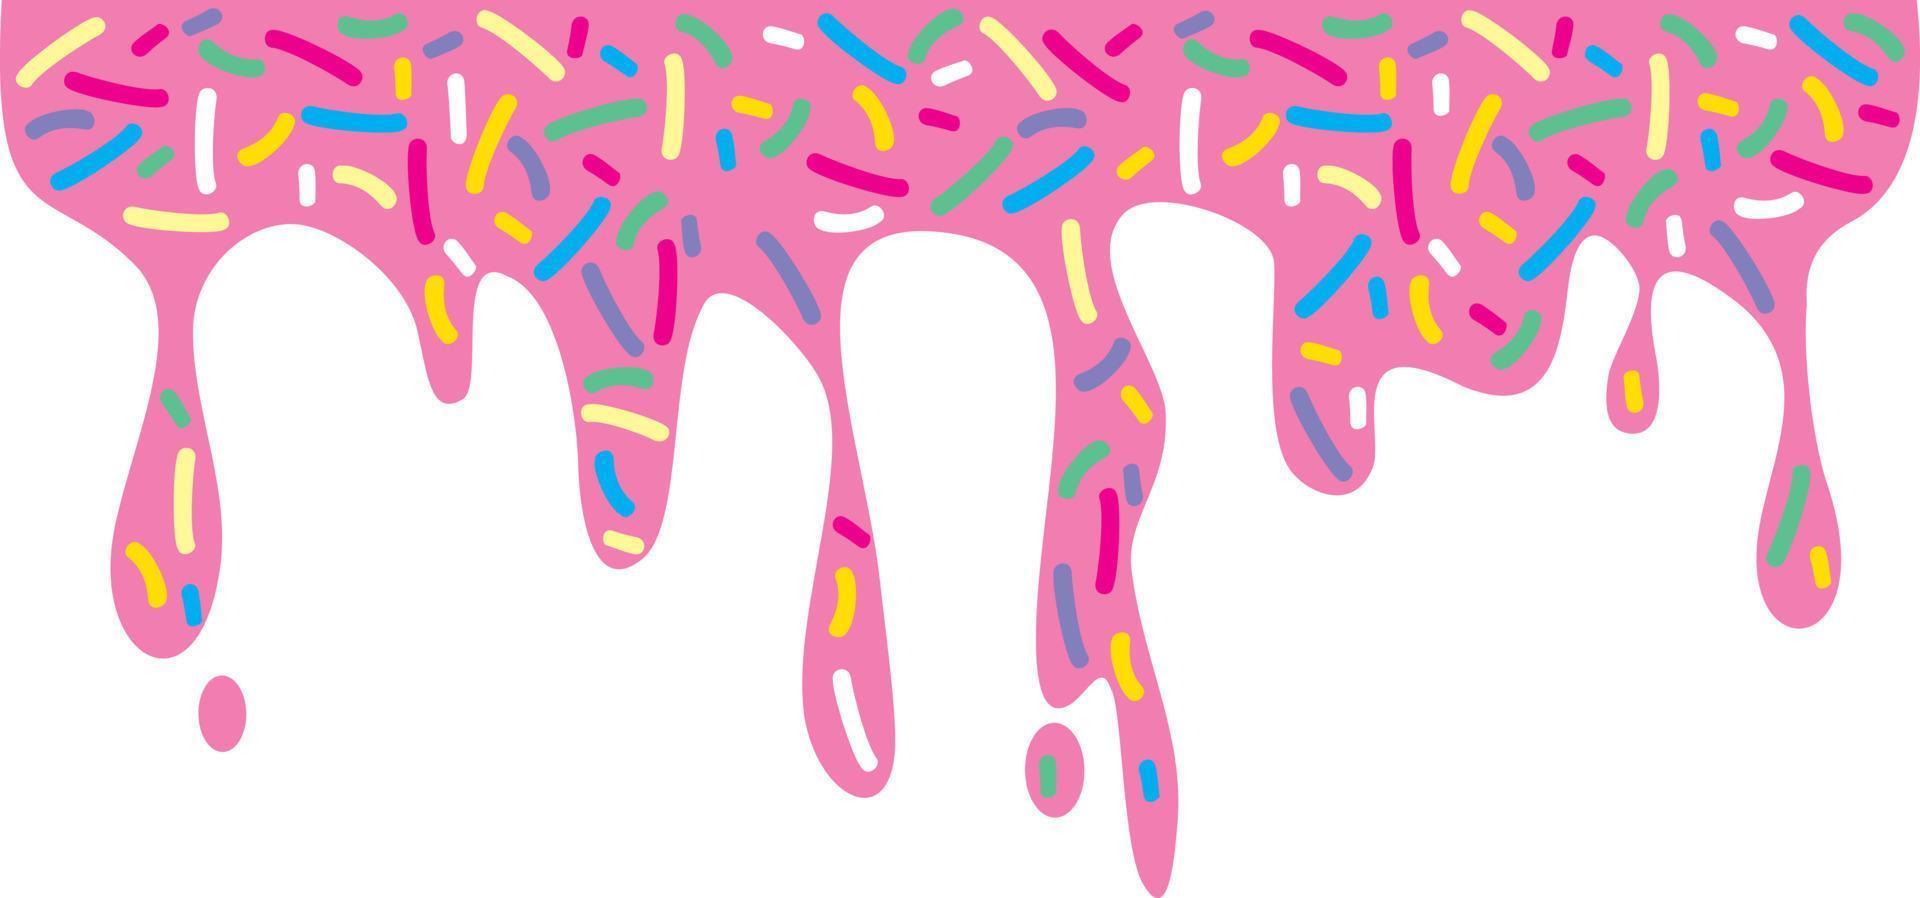 Dripping Donut Glaze and Sprinkles. Vector Illustration.